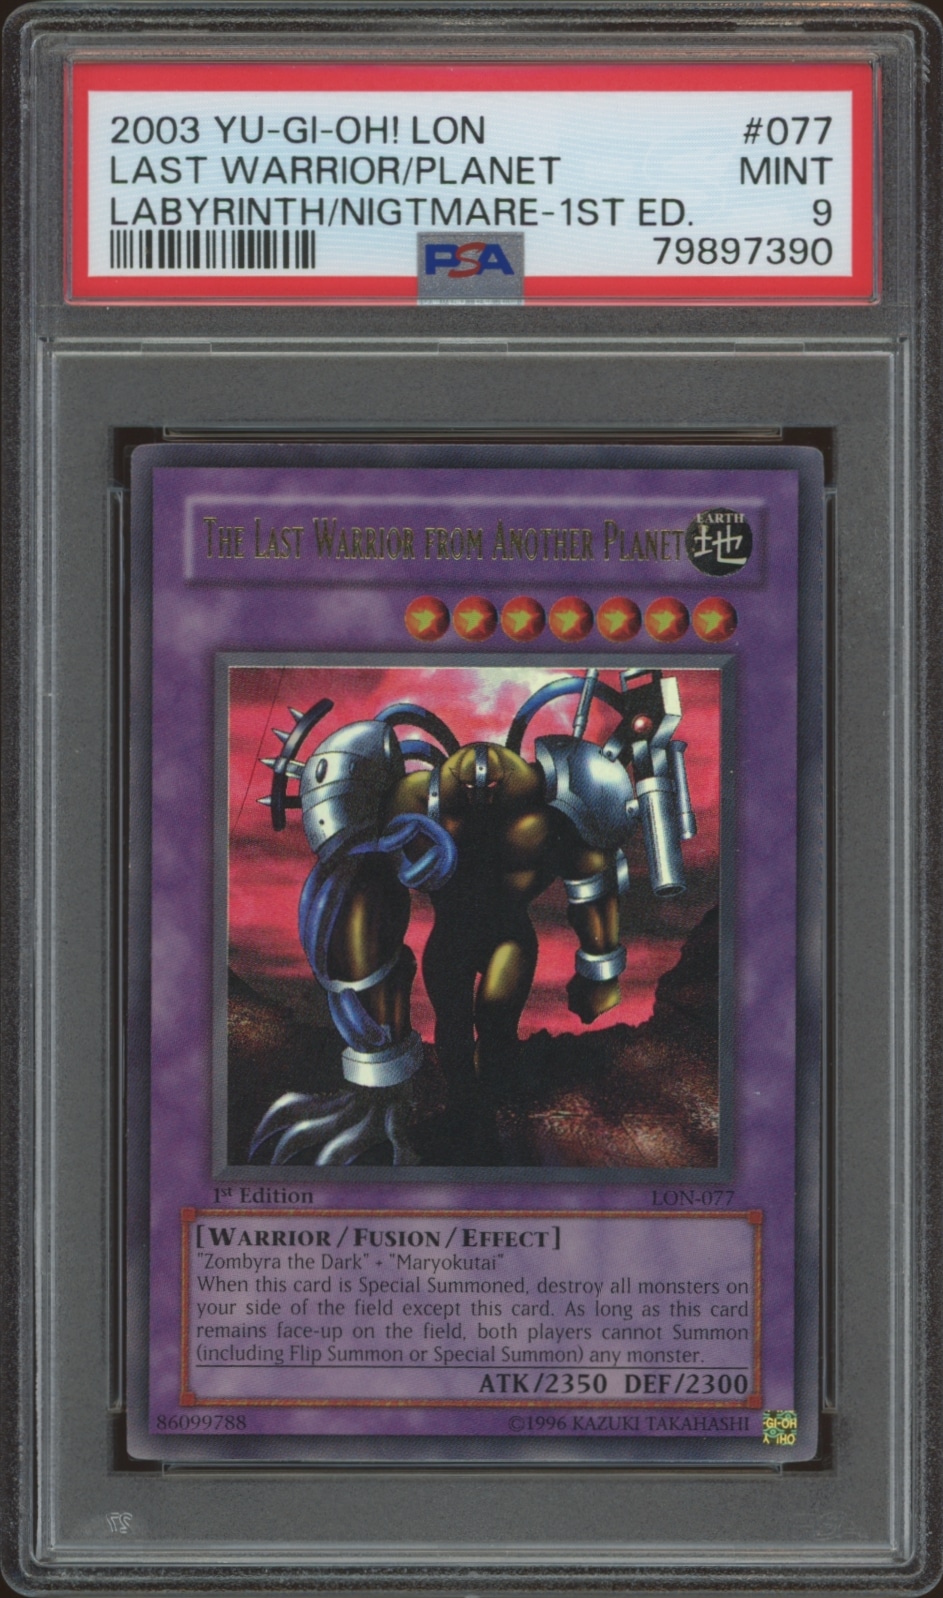 Graded PSA 9 Yu-Gi-Oh! Card Last Warrior from Another Planet, Labyrinth of Nightmare Series.